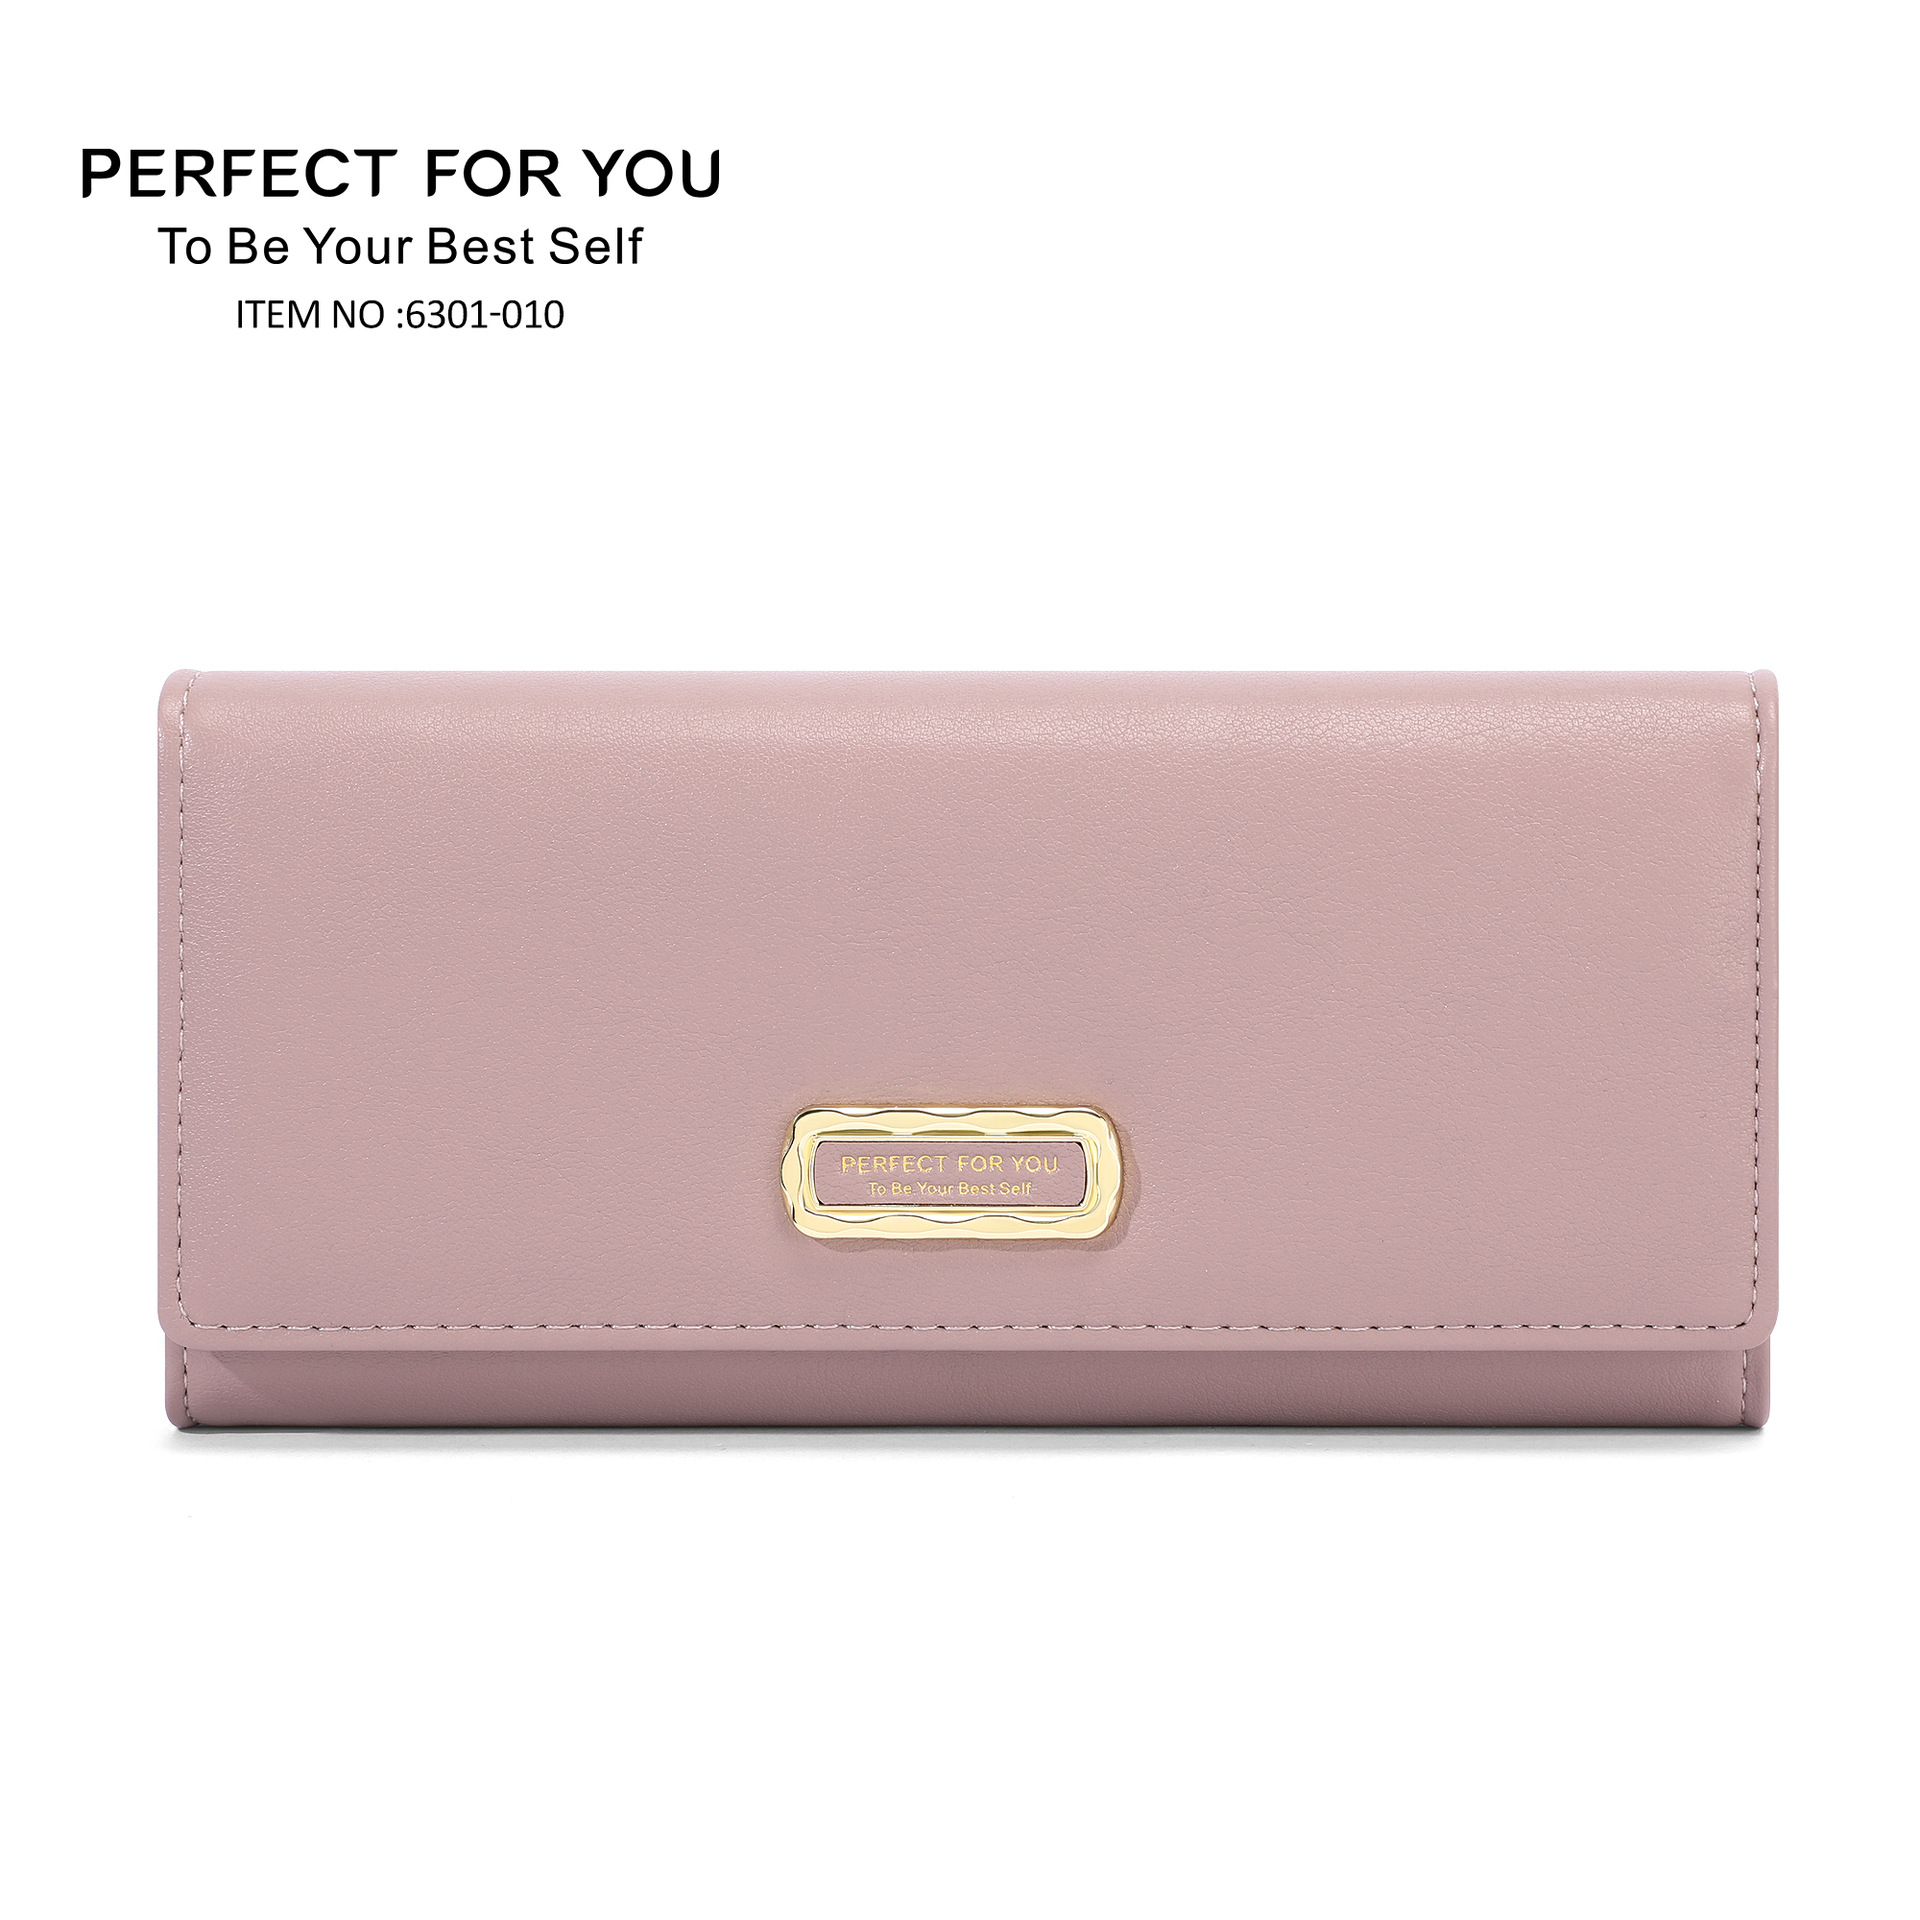 Perfect for You New Ladies' Purse Long and Simple Pu Advanced Sense Coin Purse Tri-Fold Clutch